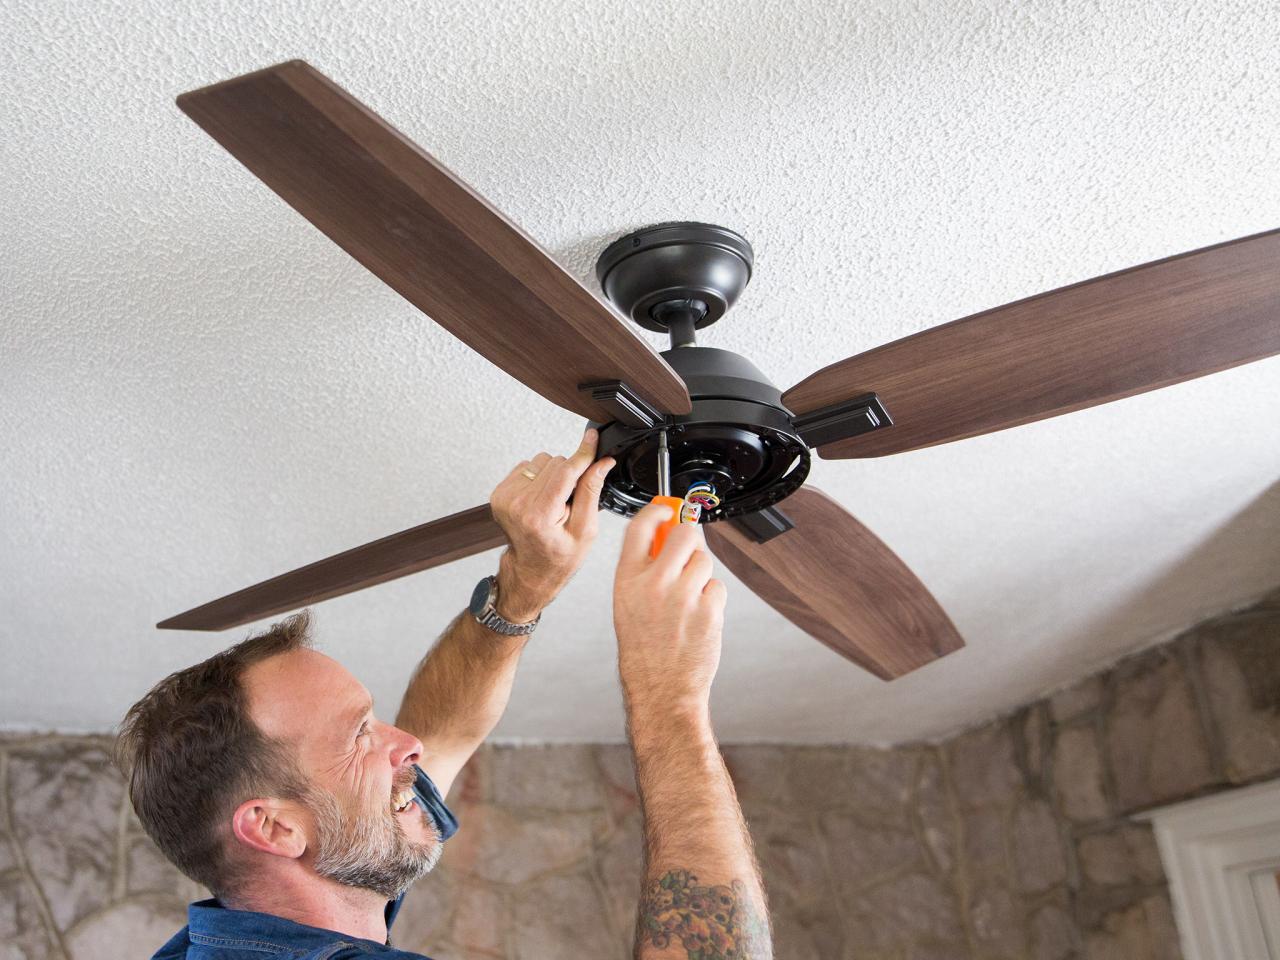 How To Fix Ceiling Fan How to Install a Ceiling Fan | HGTV